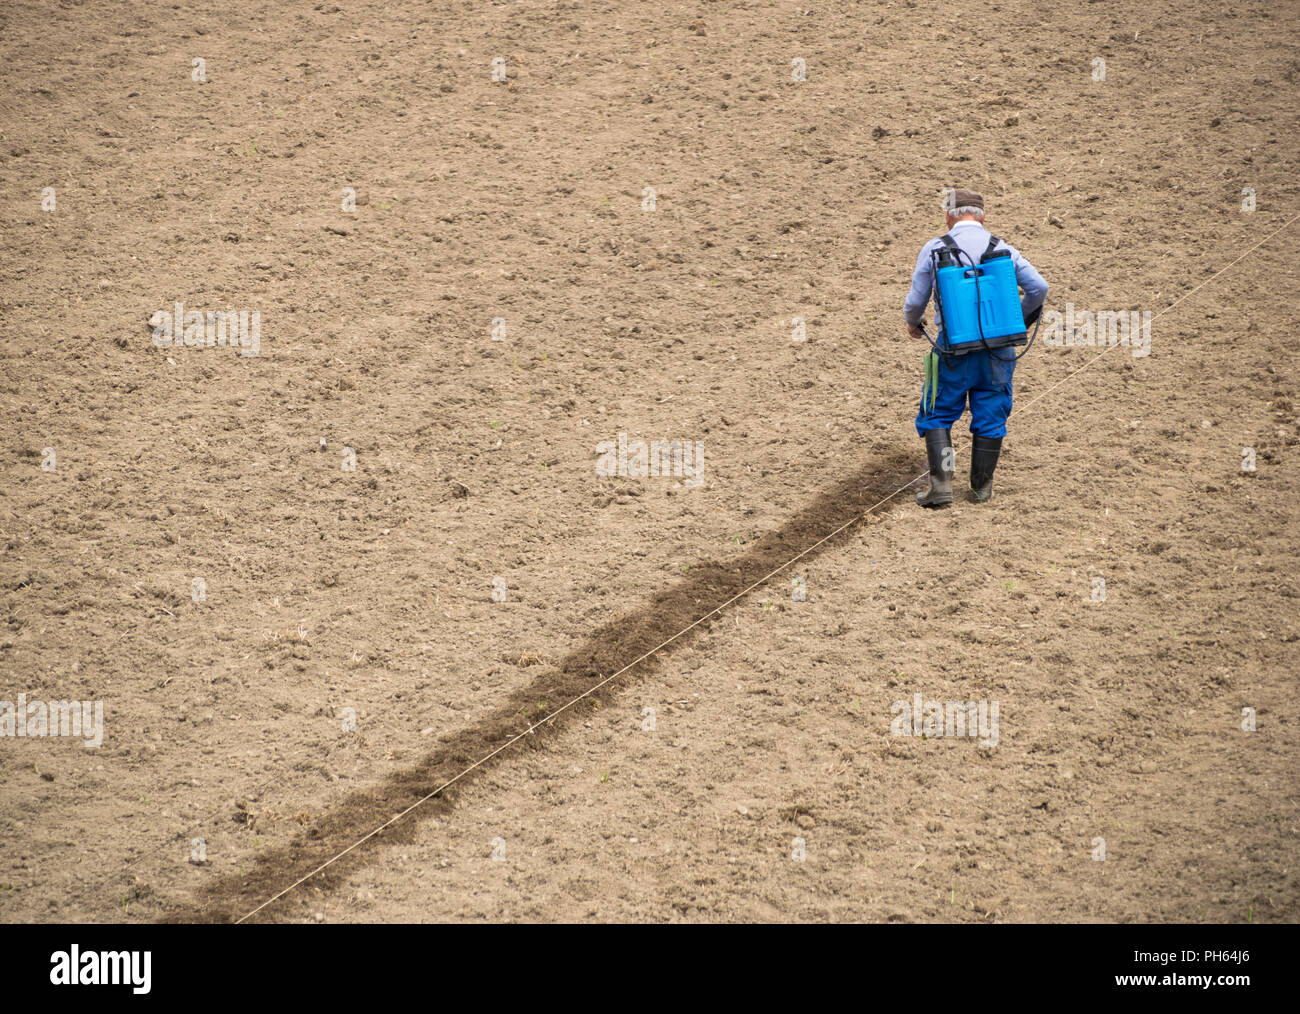 man fumigates the land of the field before cultivating the harvest Stock Photo